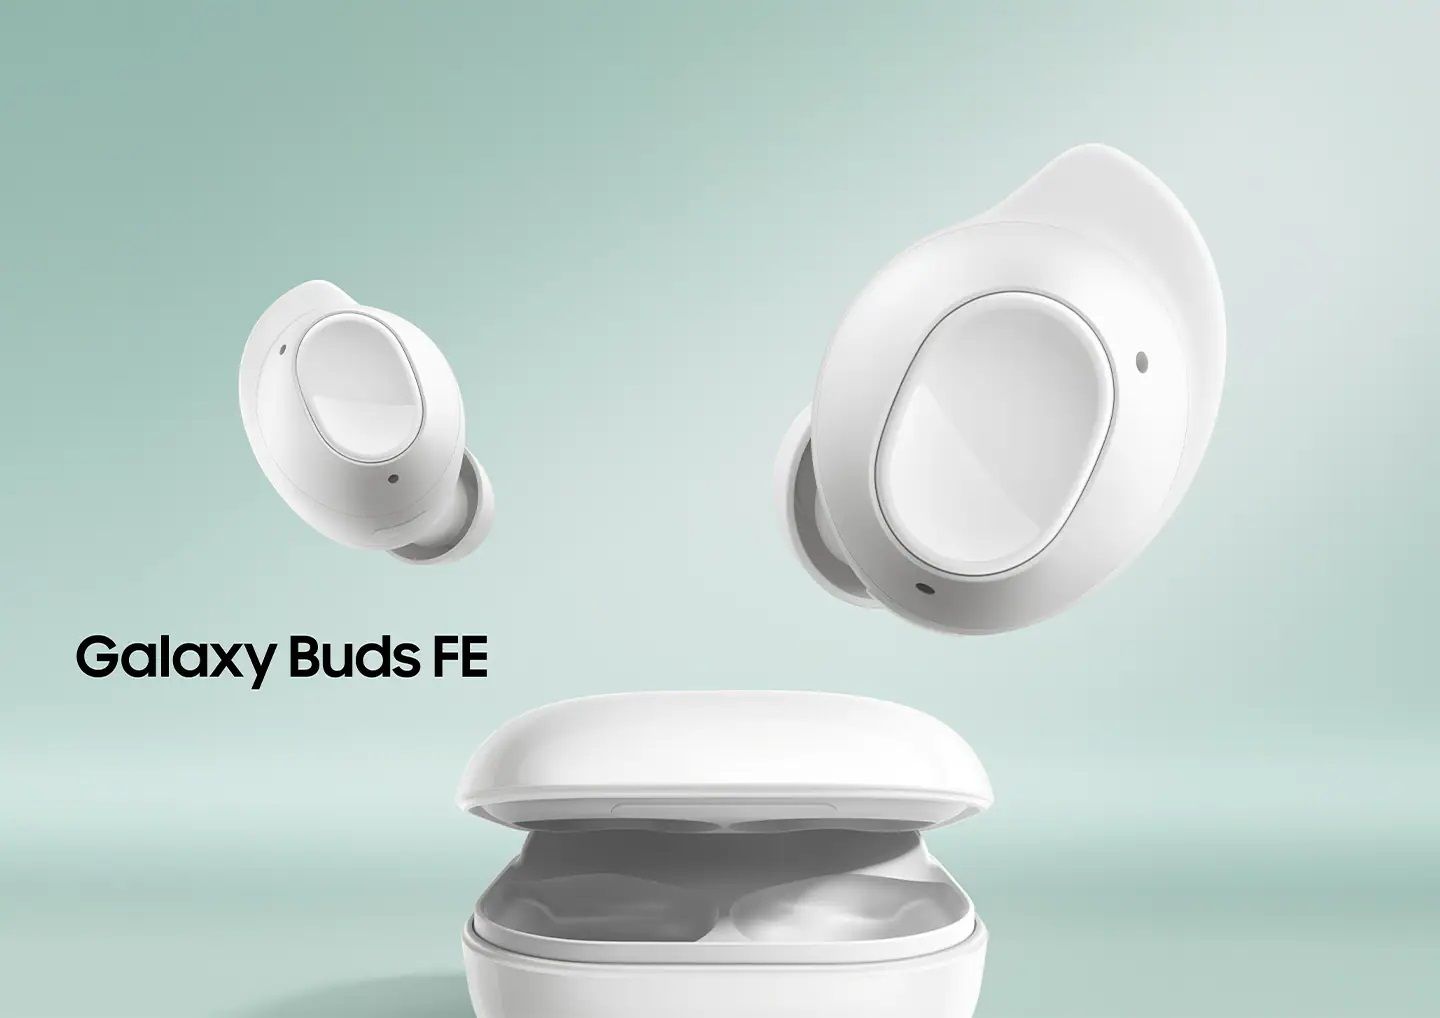 Samsung Galaxy S23 FE, Galaxy Tab S9 FE and Galaxy Buds FE Bring Standout  Galaxy Features to Even More Users